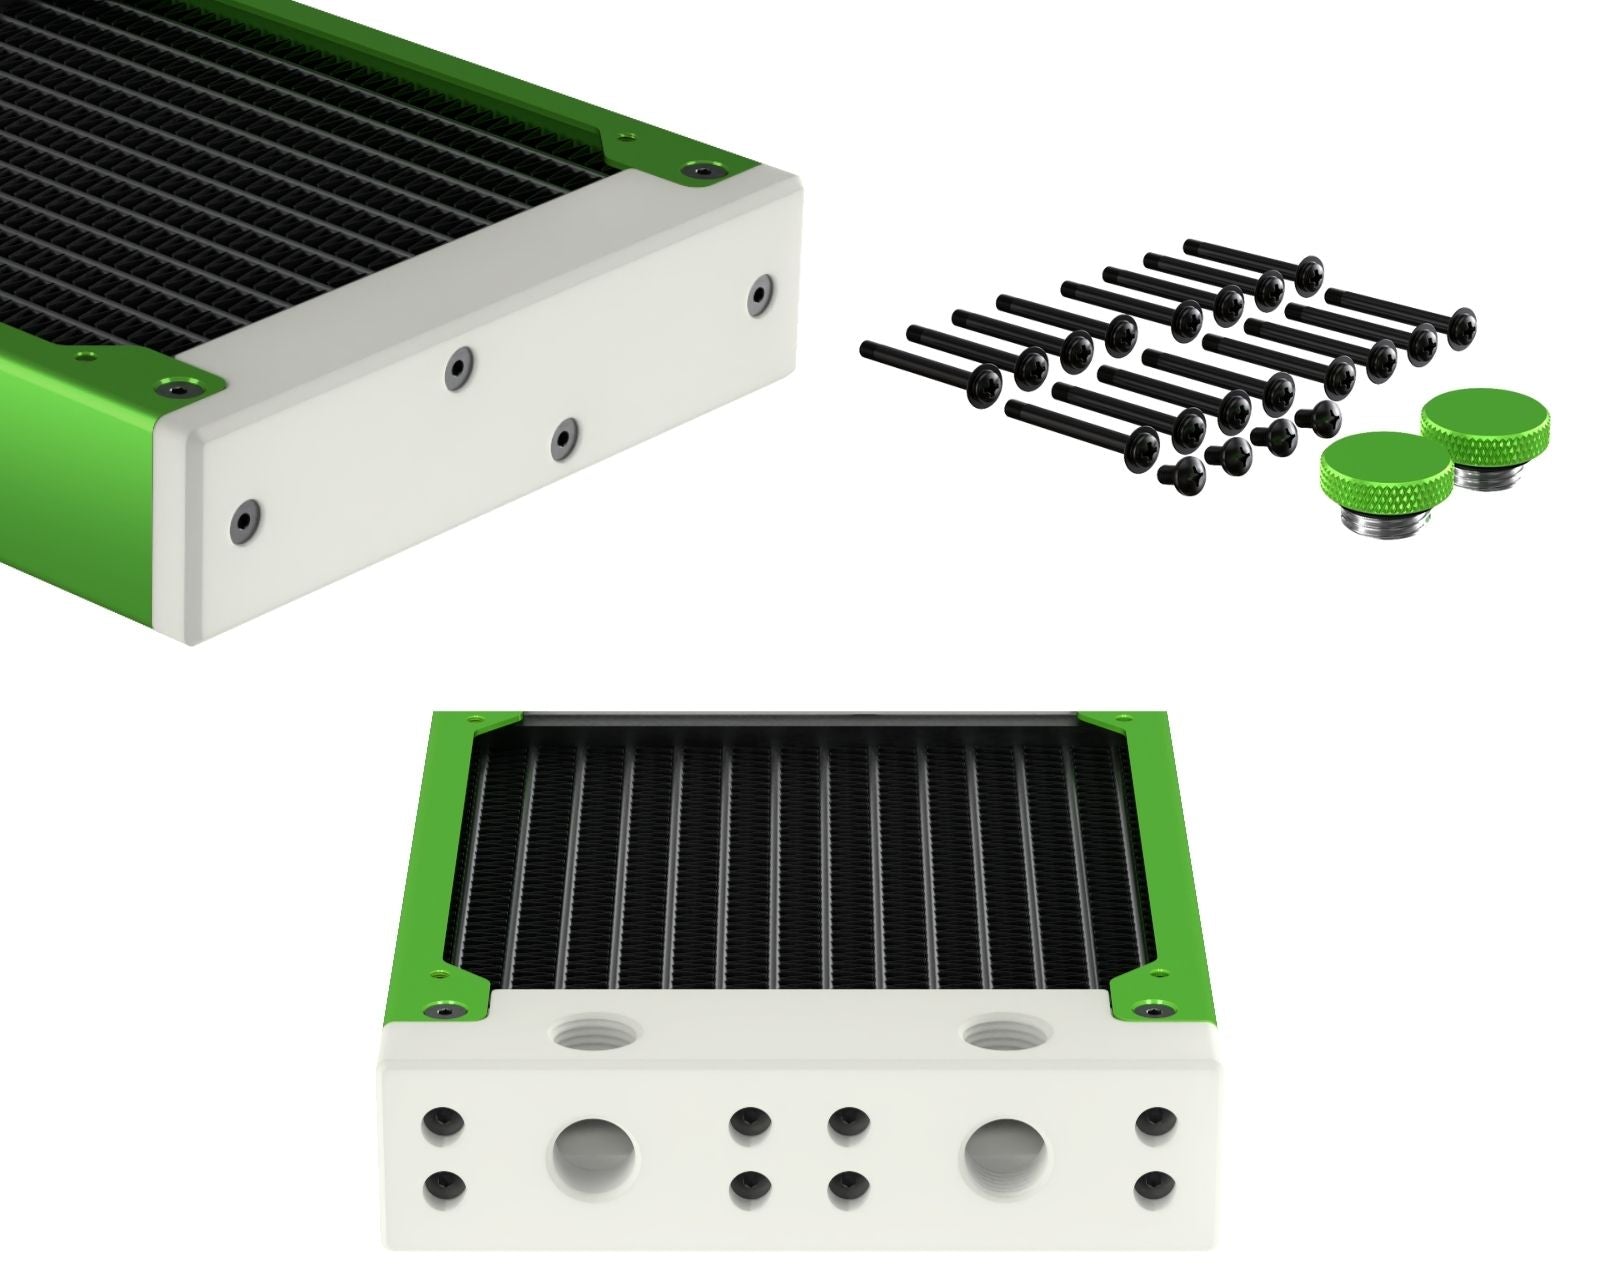 PrimoChill 480SL (30mm) EXIMO Modular Radiator, White POM, 4x120mm, Quad Fan (R-SL-W48) Available in 20+ Colors, Assembled in USA and Custom Watercooling Loop Ready - Toxic Candy